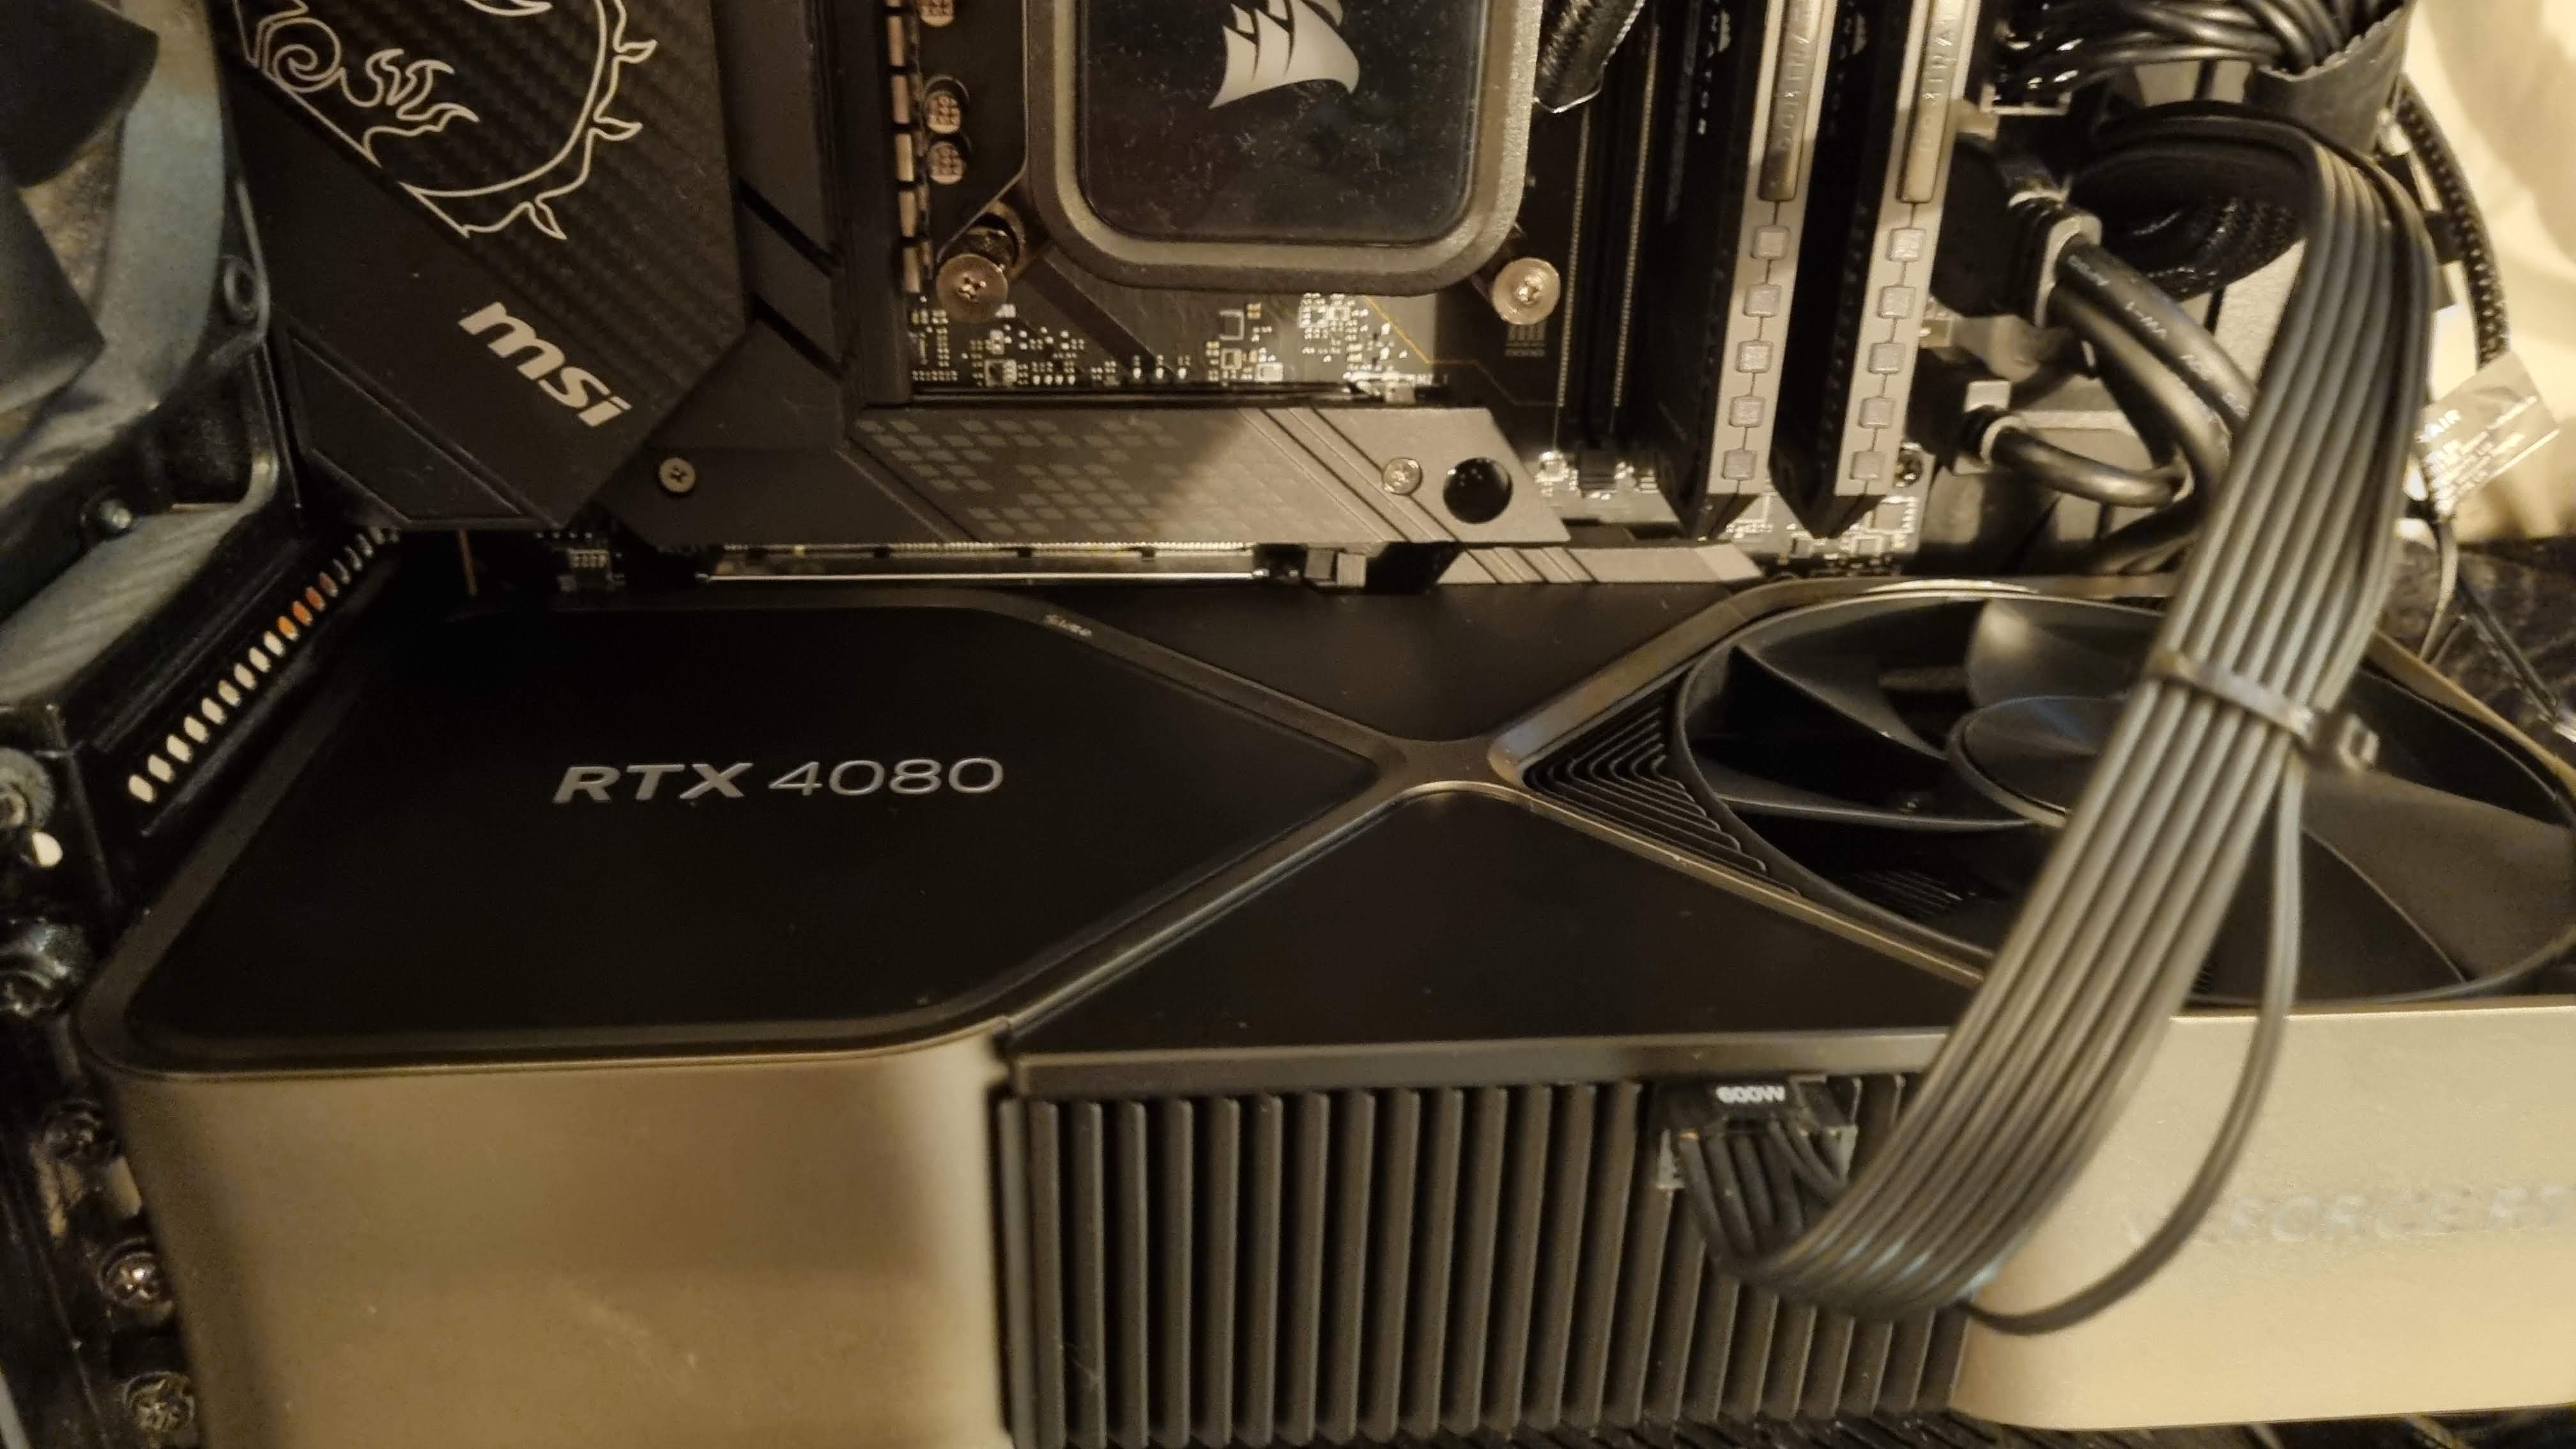 RTX 4080 GPU built into the motherboard